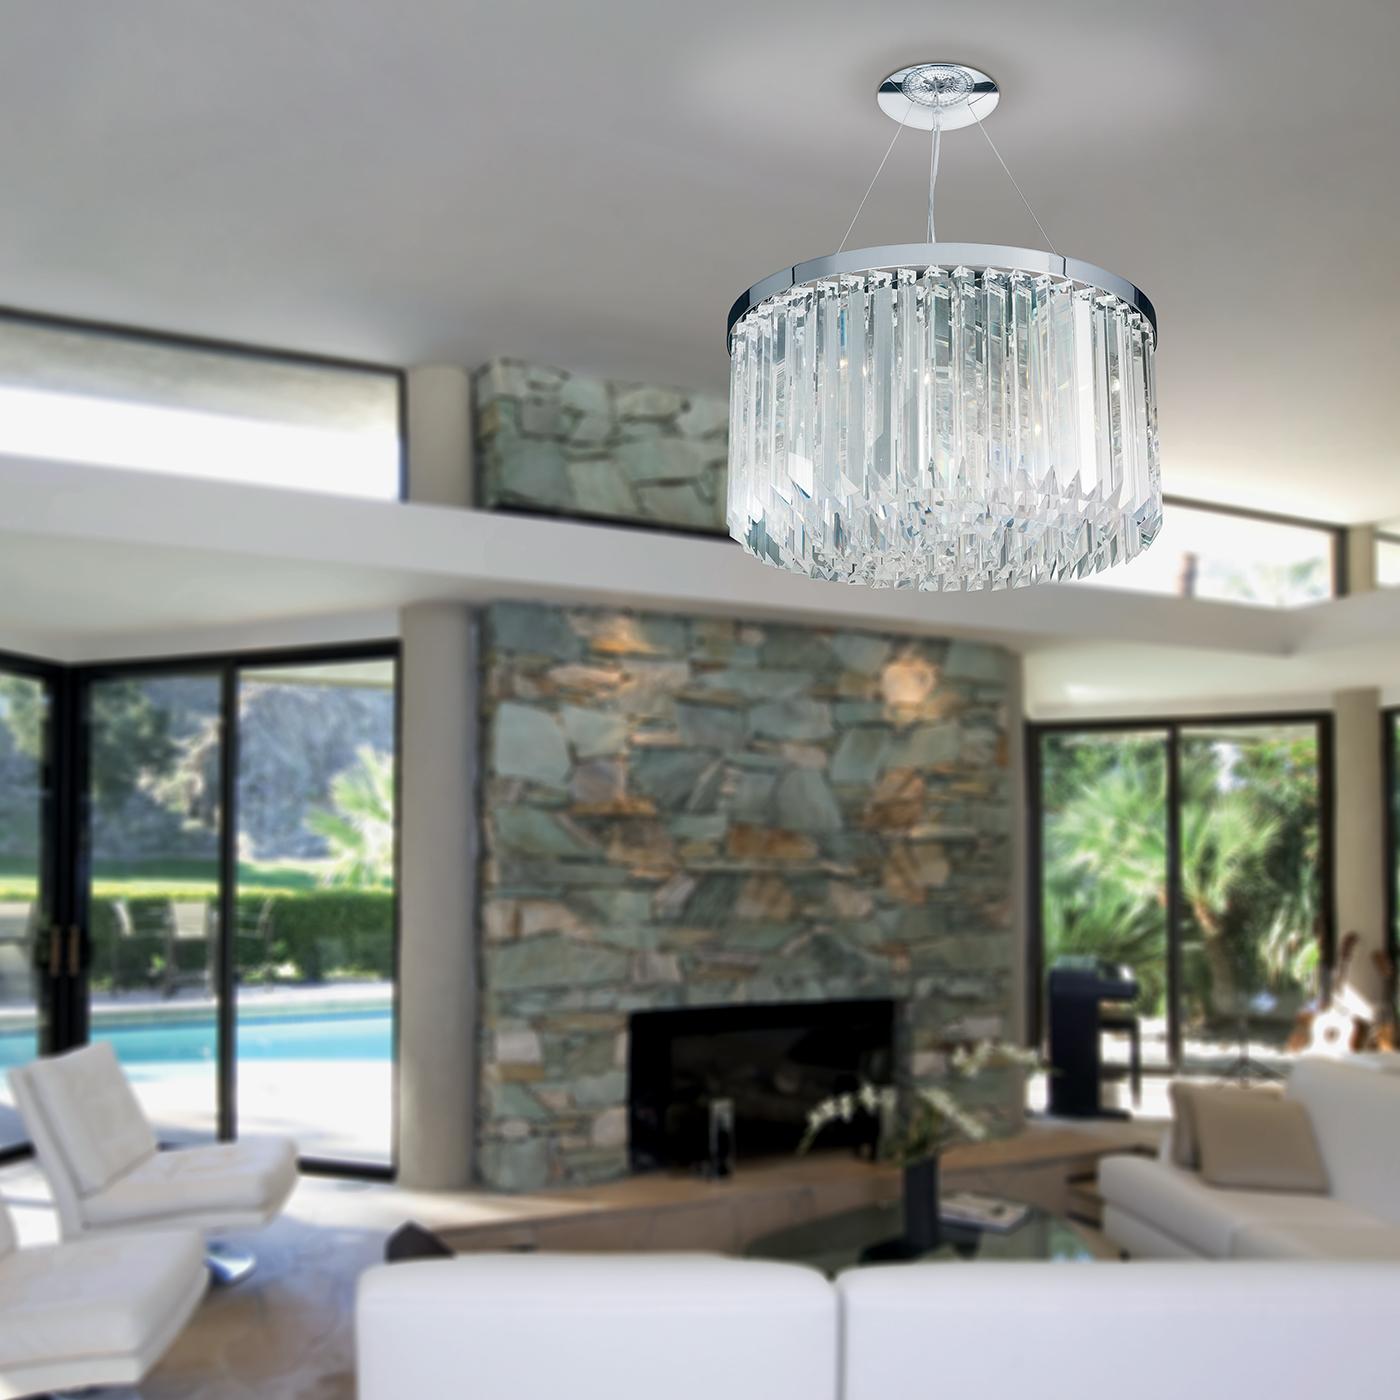 The crystal drop round pendant light fuses traditional and modern styling, reworking a classic chandelier design with a contemporary edge. Crafted from transparent lead crystal, its concentric circle configuration makes a stunning focal point in any